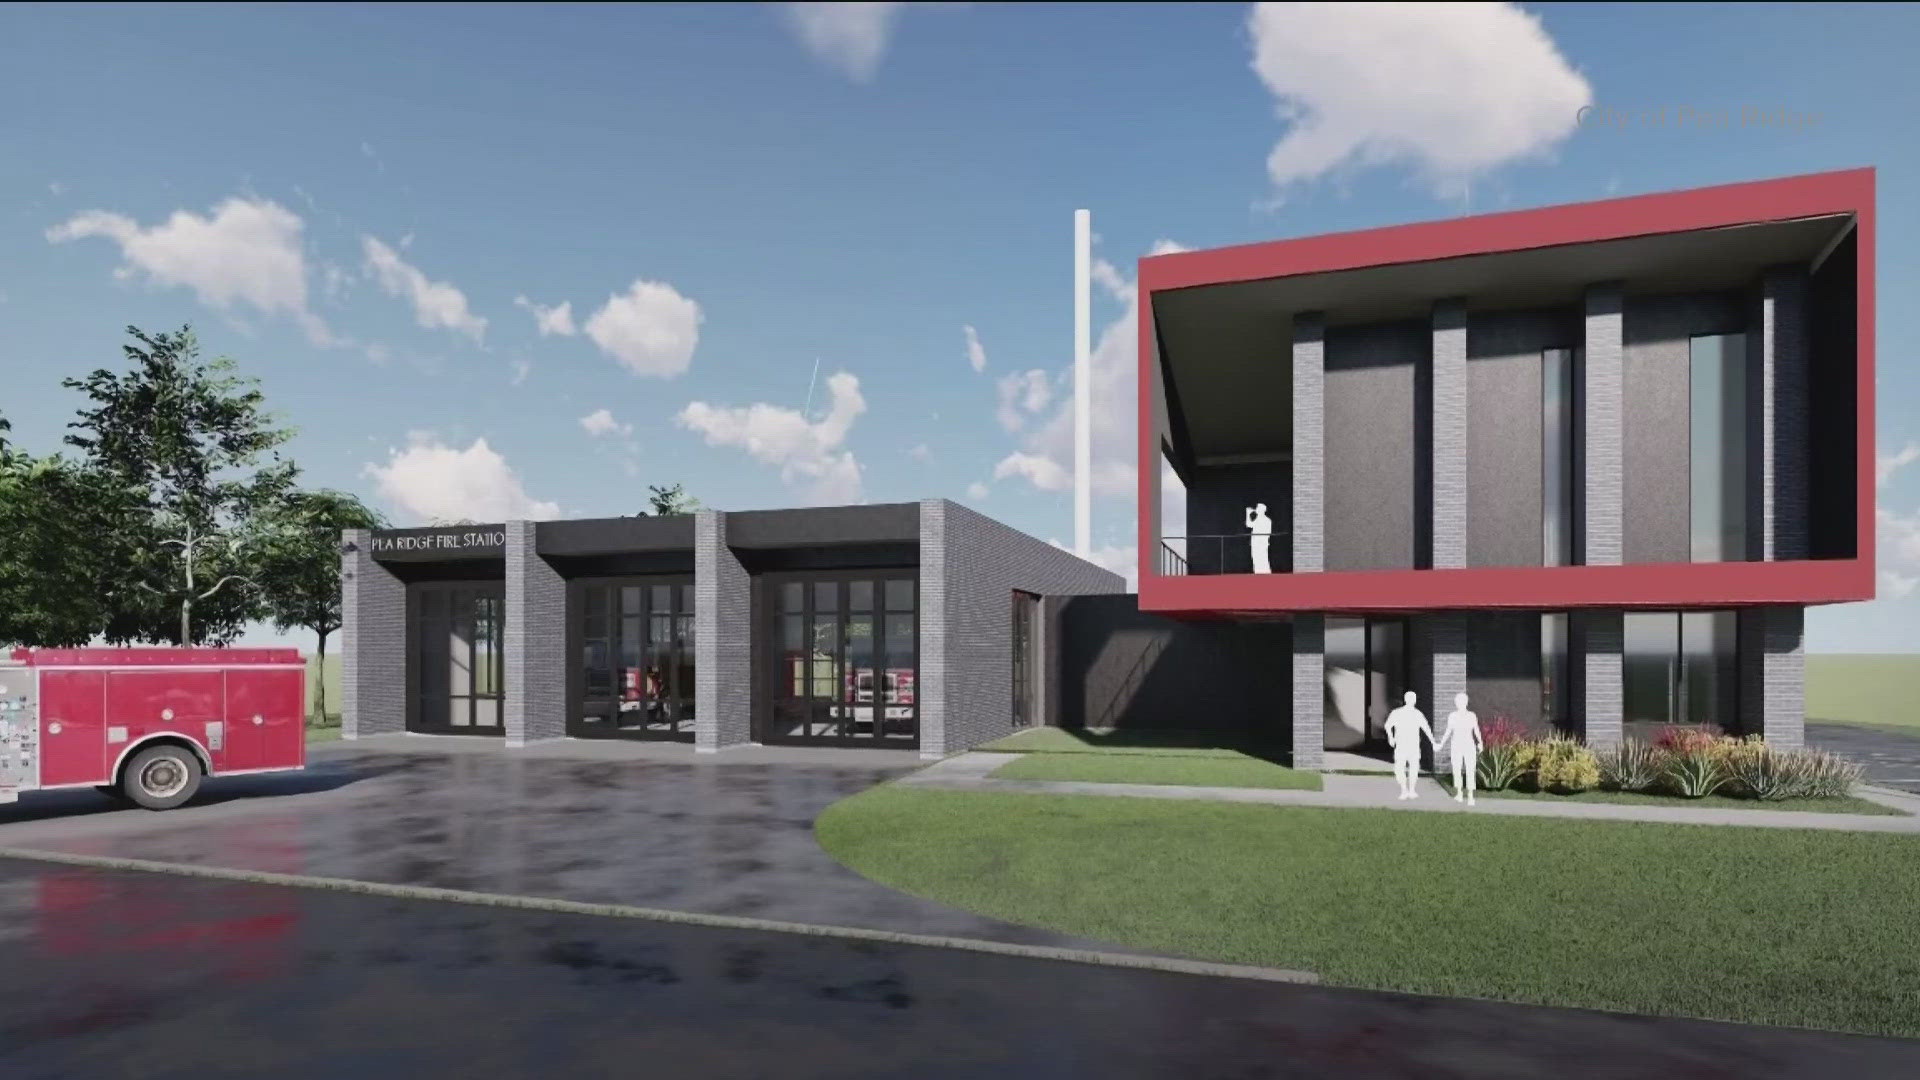 The Pea Ridge Fire Department recently announced plans for a new second fire station while the police department is currently looking into new facilities.